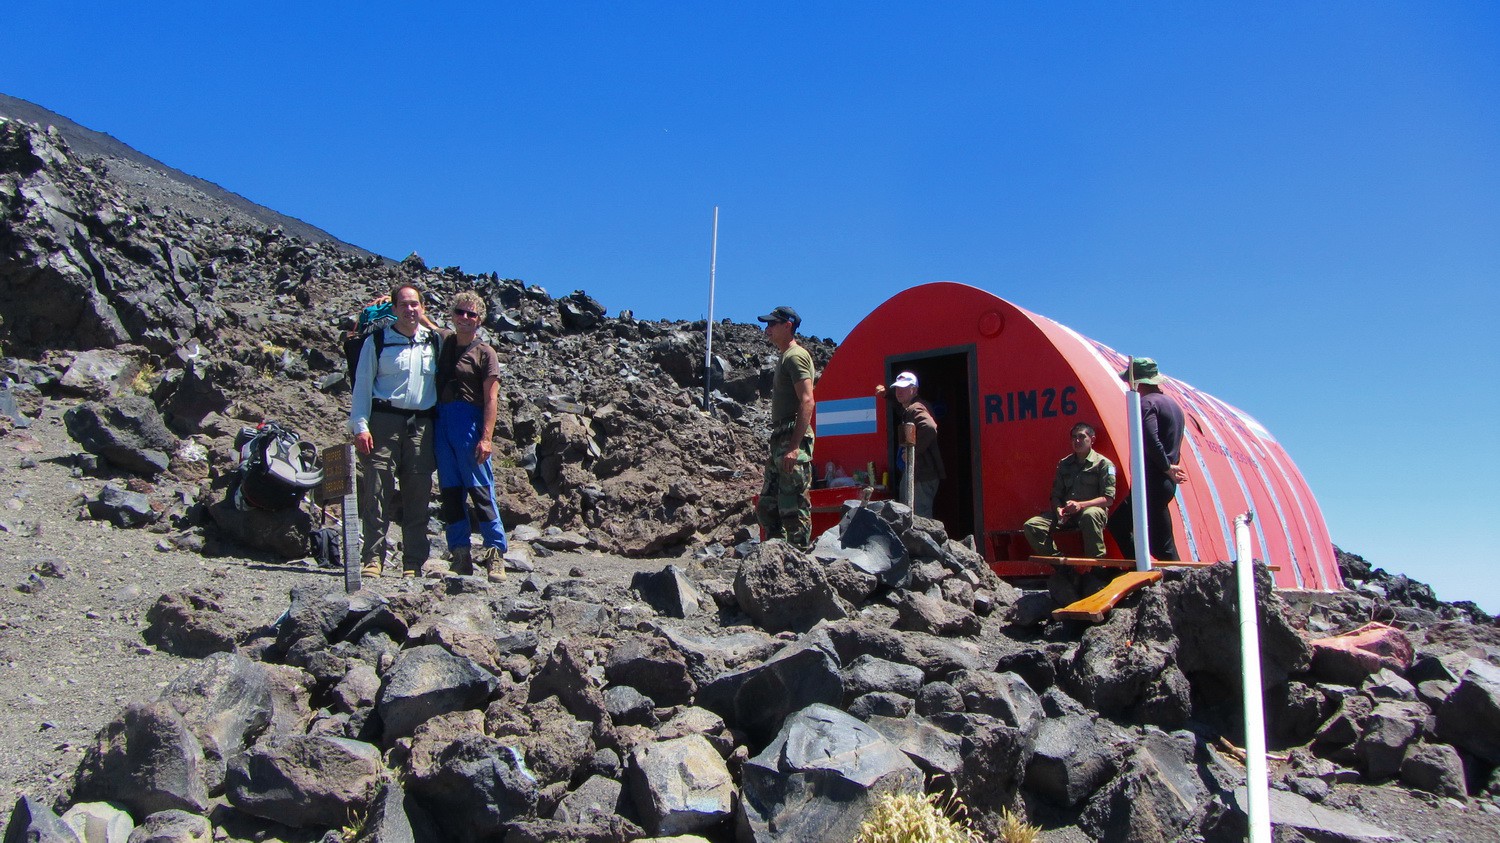 The first hut RIM26 at 2400 meters sea level on the way to Volcan Lanin